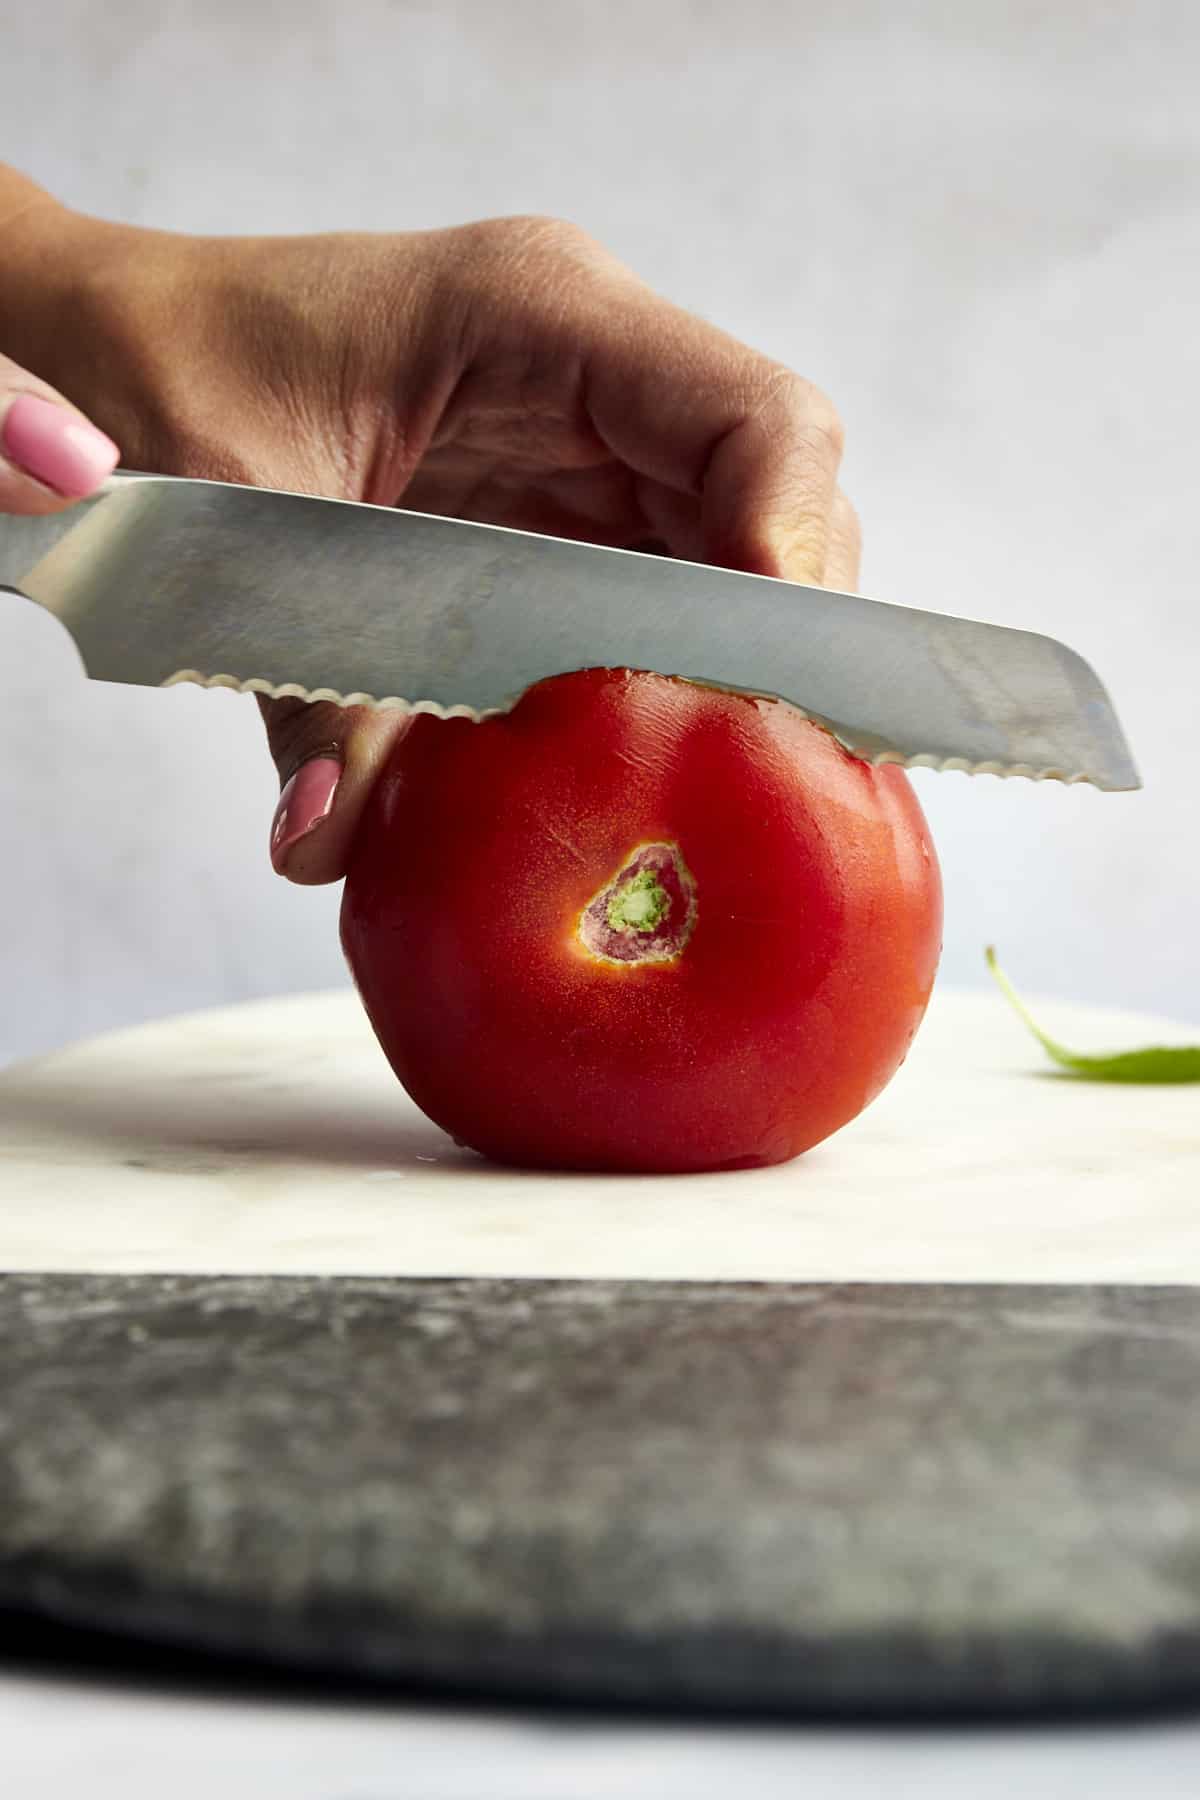 How to Cut a Tomato (3 Ways)